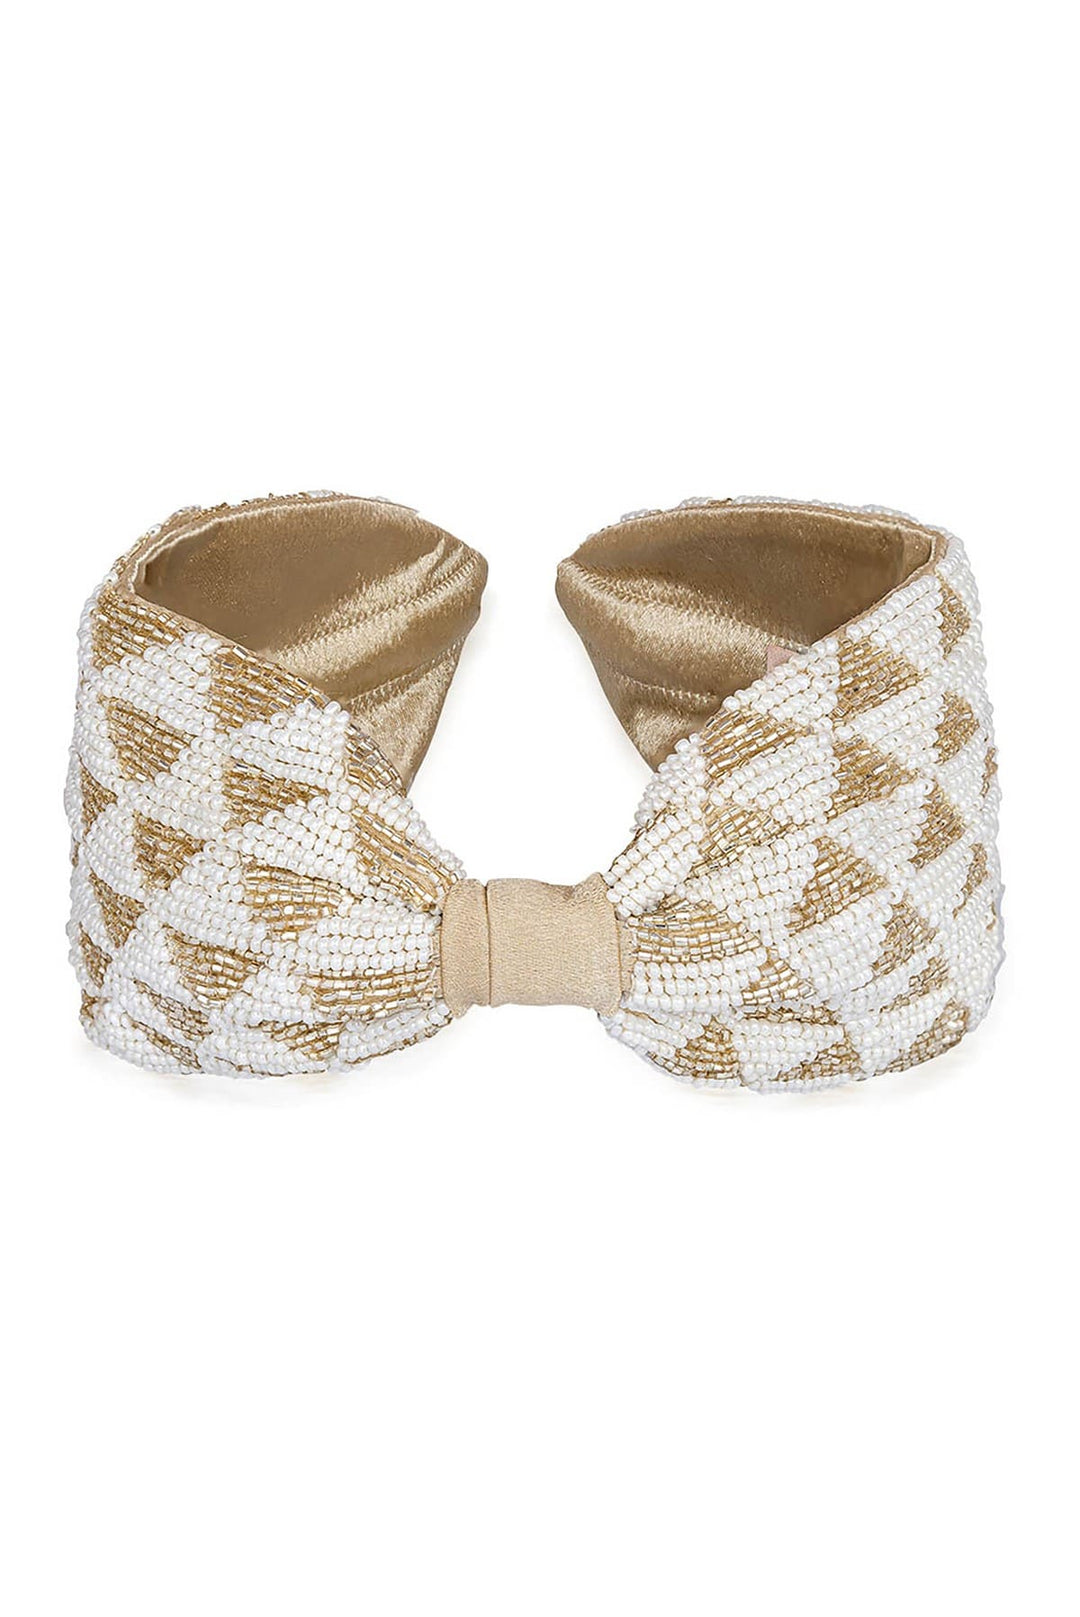 Selene Knotted Hair Band - White & Gold